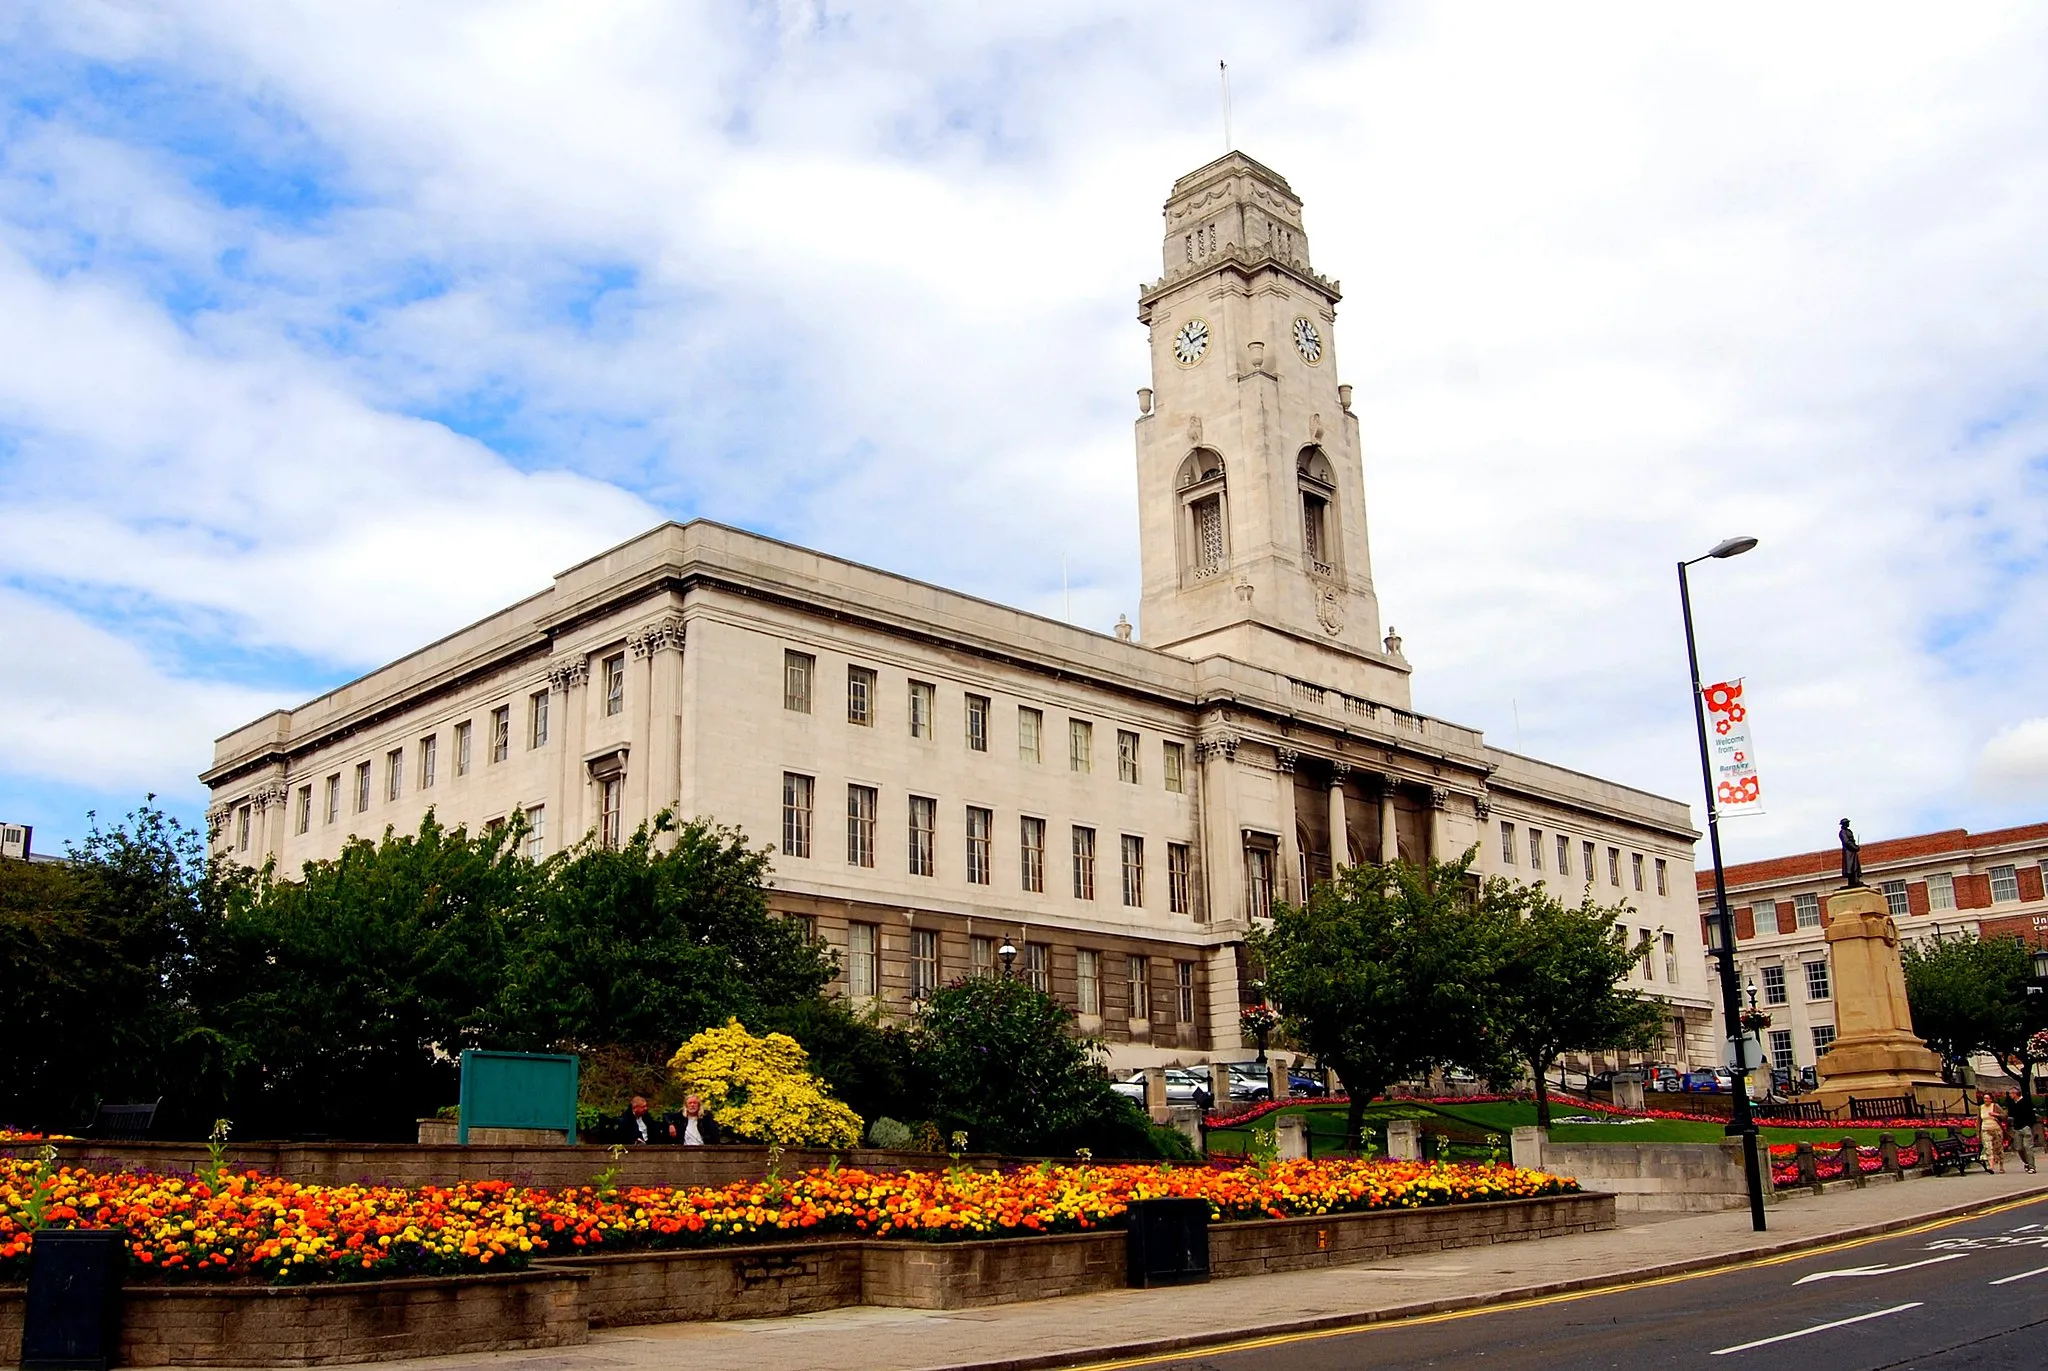 Photo showing: This fine building had been the Municipal heart of Barnsley - recently changed usage and now contains the historical relics of the town as a Museum.